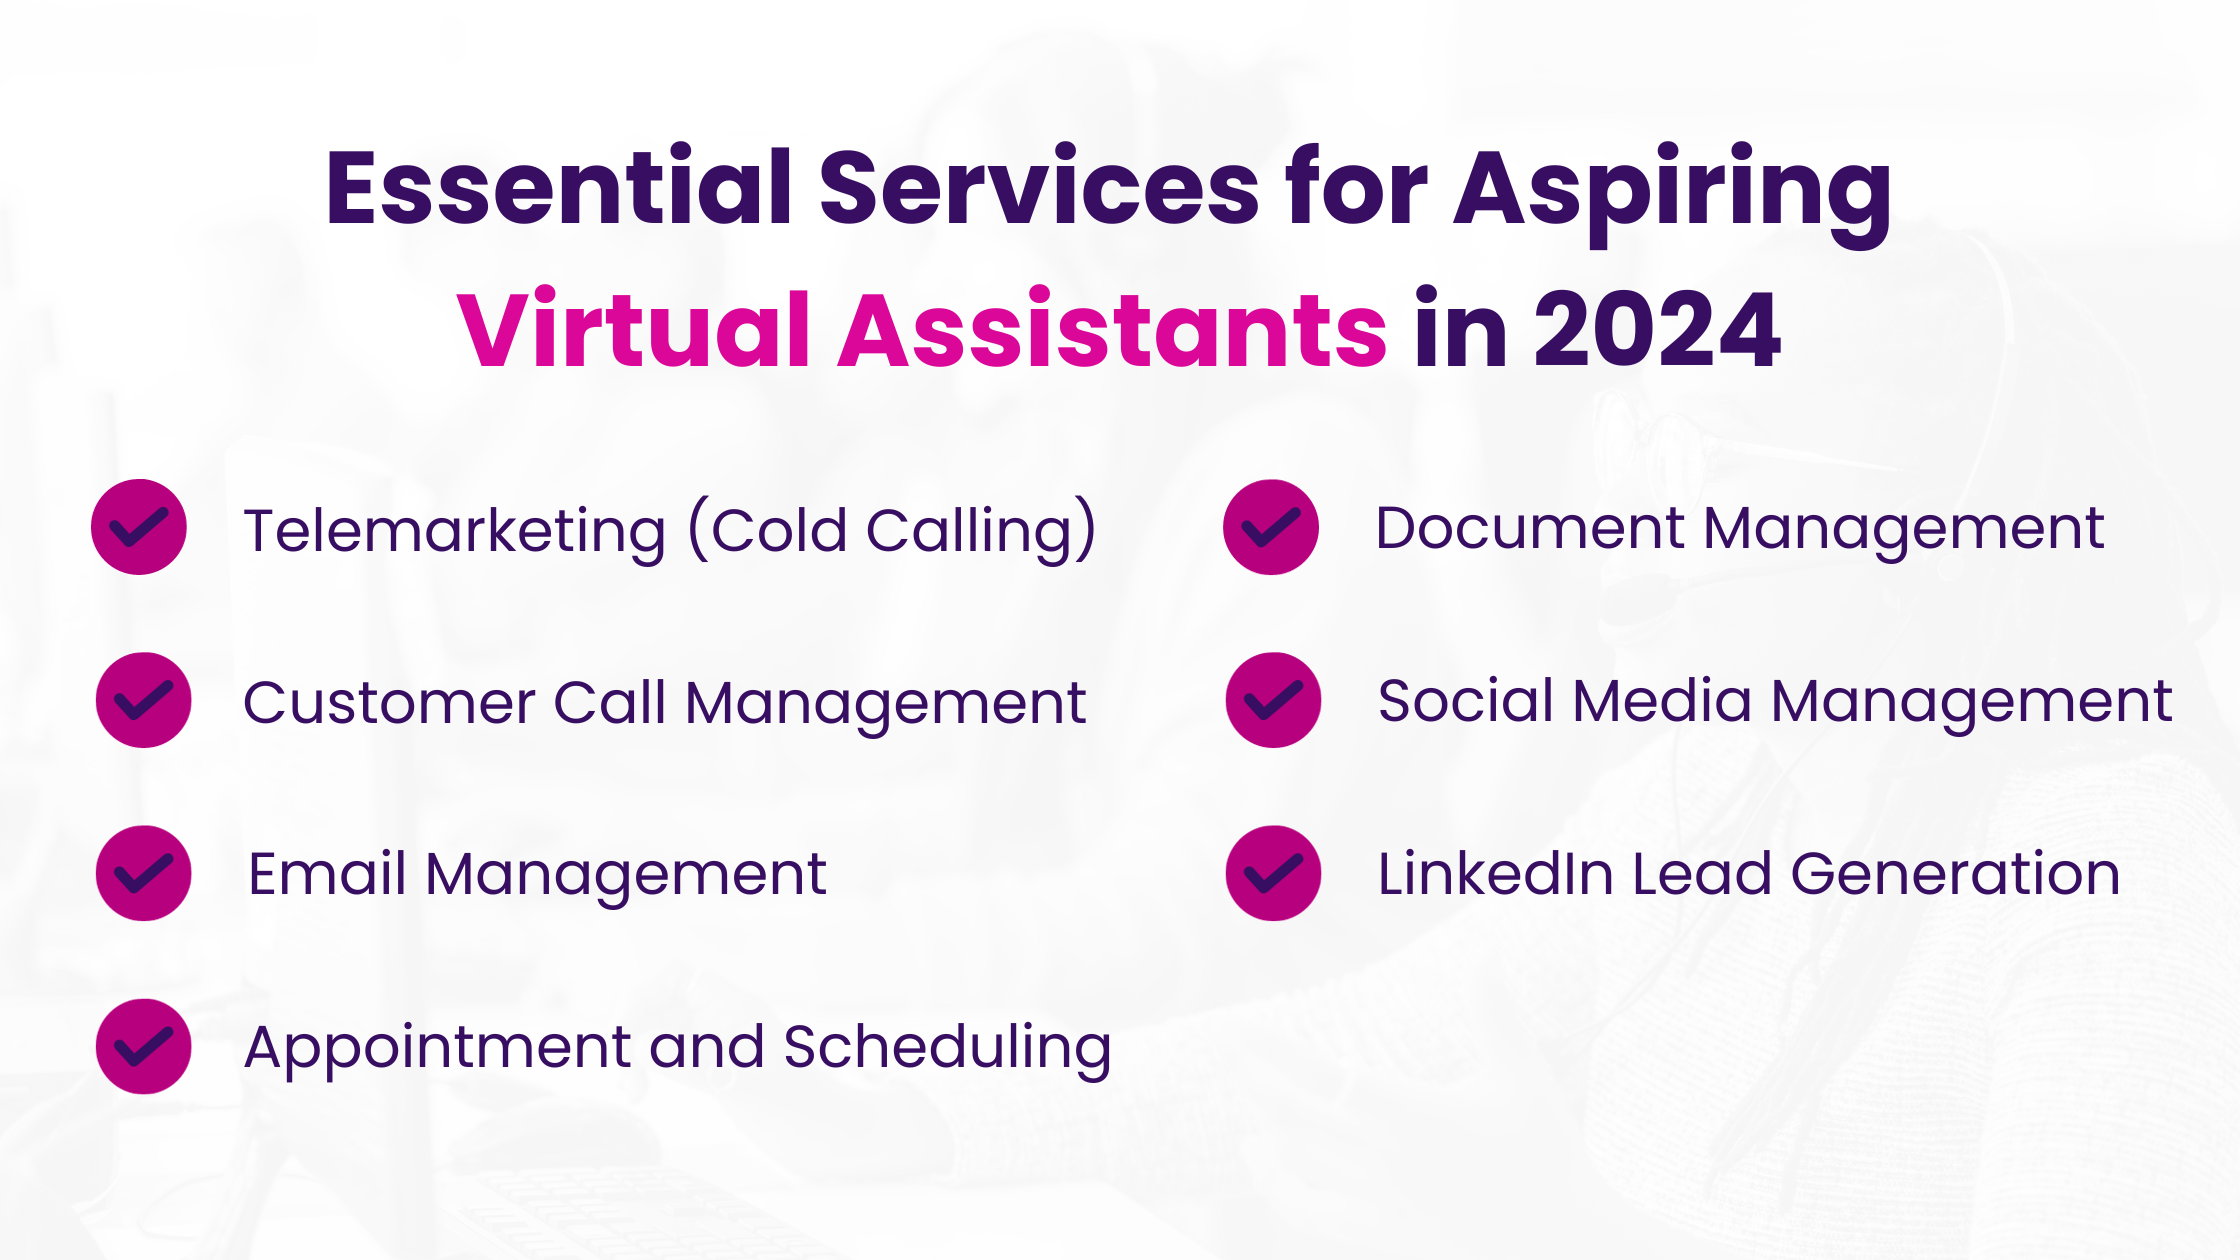 Essential Services for Aspiring Virtual Assistants in 2024